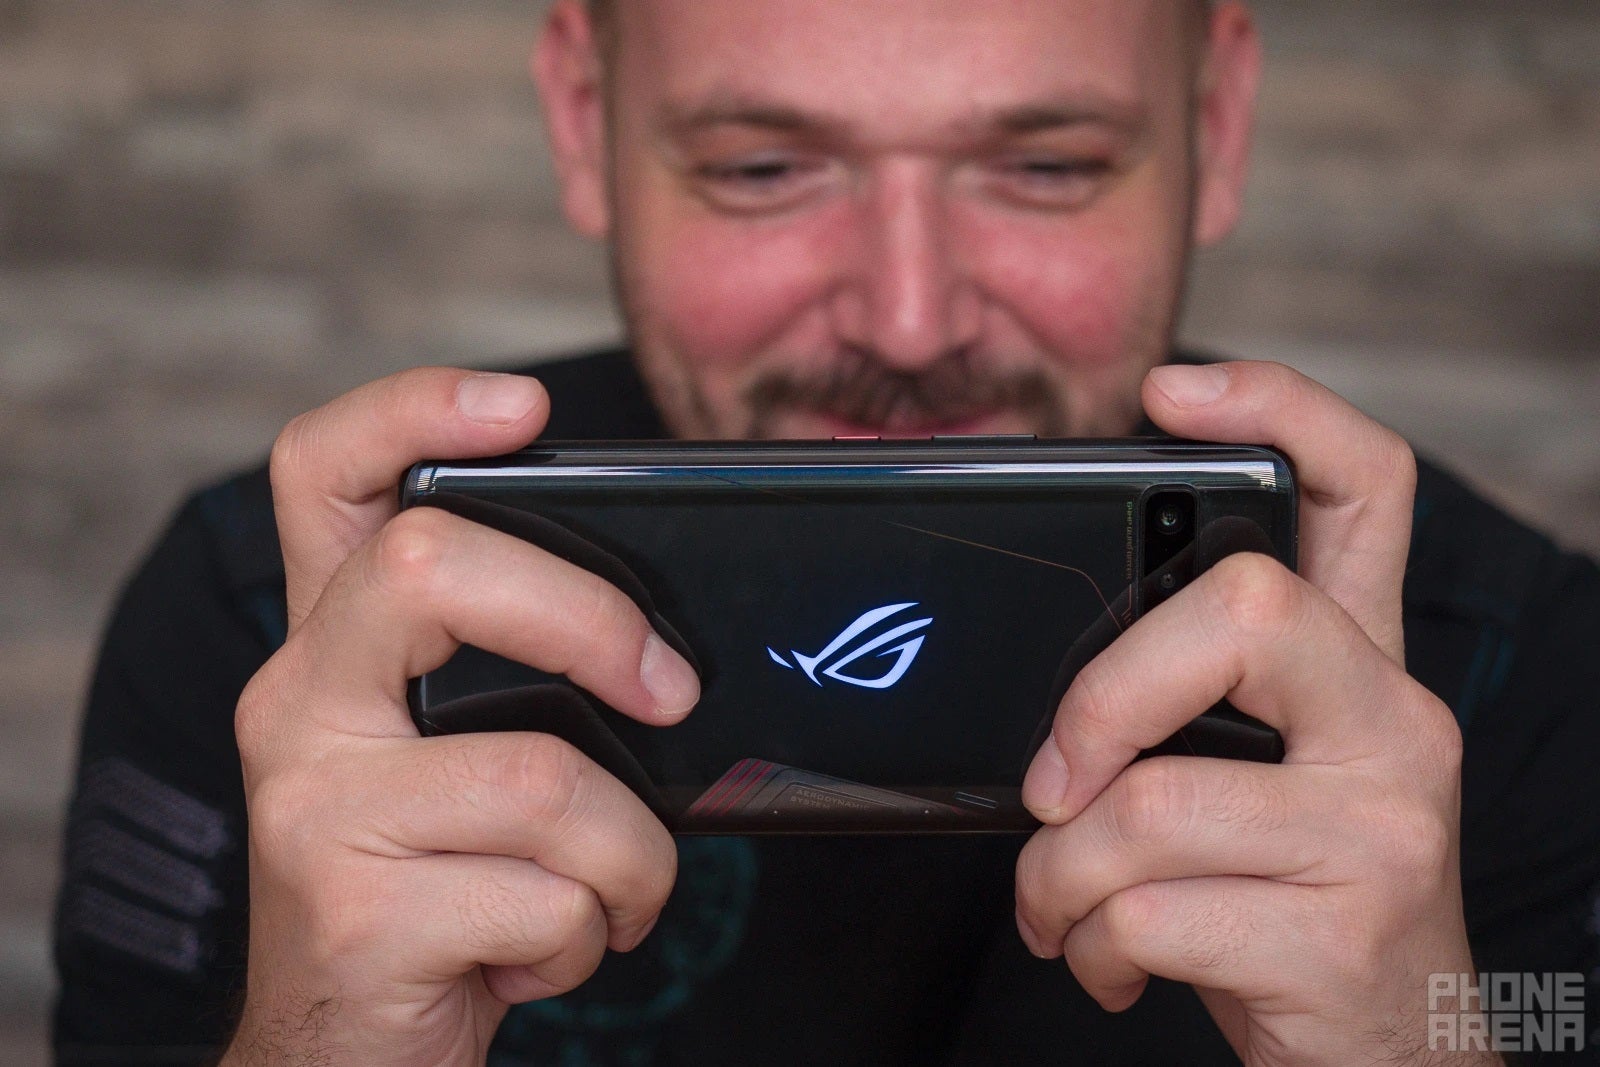 Look at his happy face!  - Vote now: Would you buy a gaming phone as a daily driver?